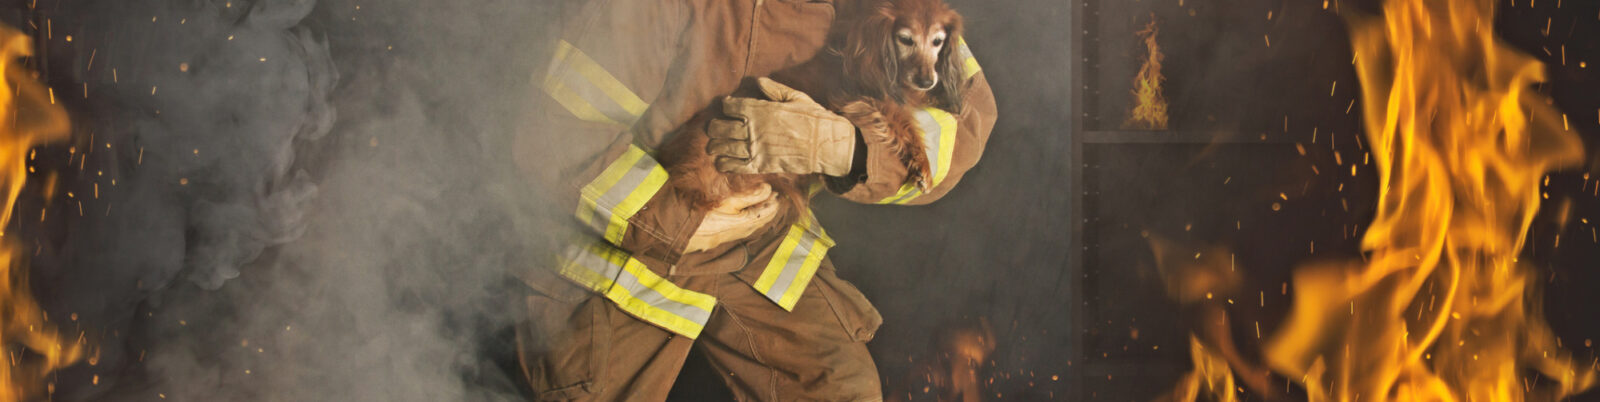 How To Protect Your Pets from House Fires